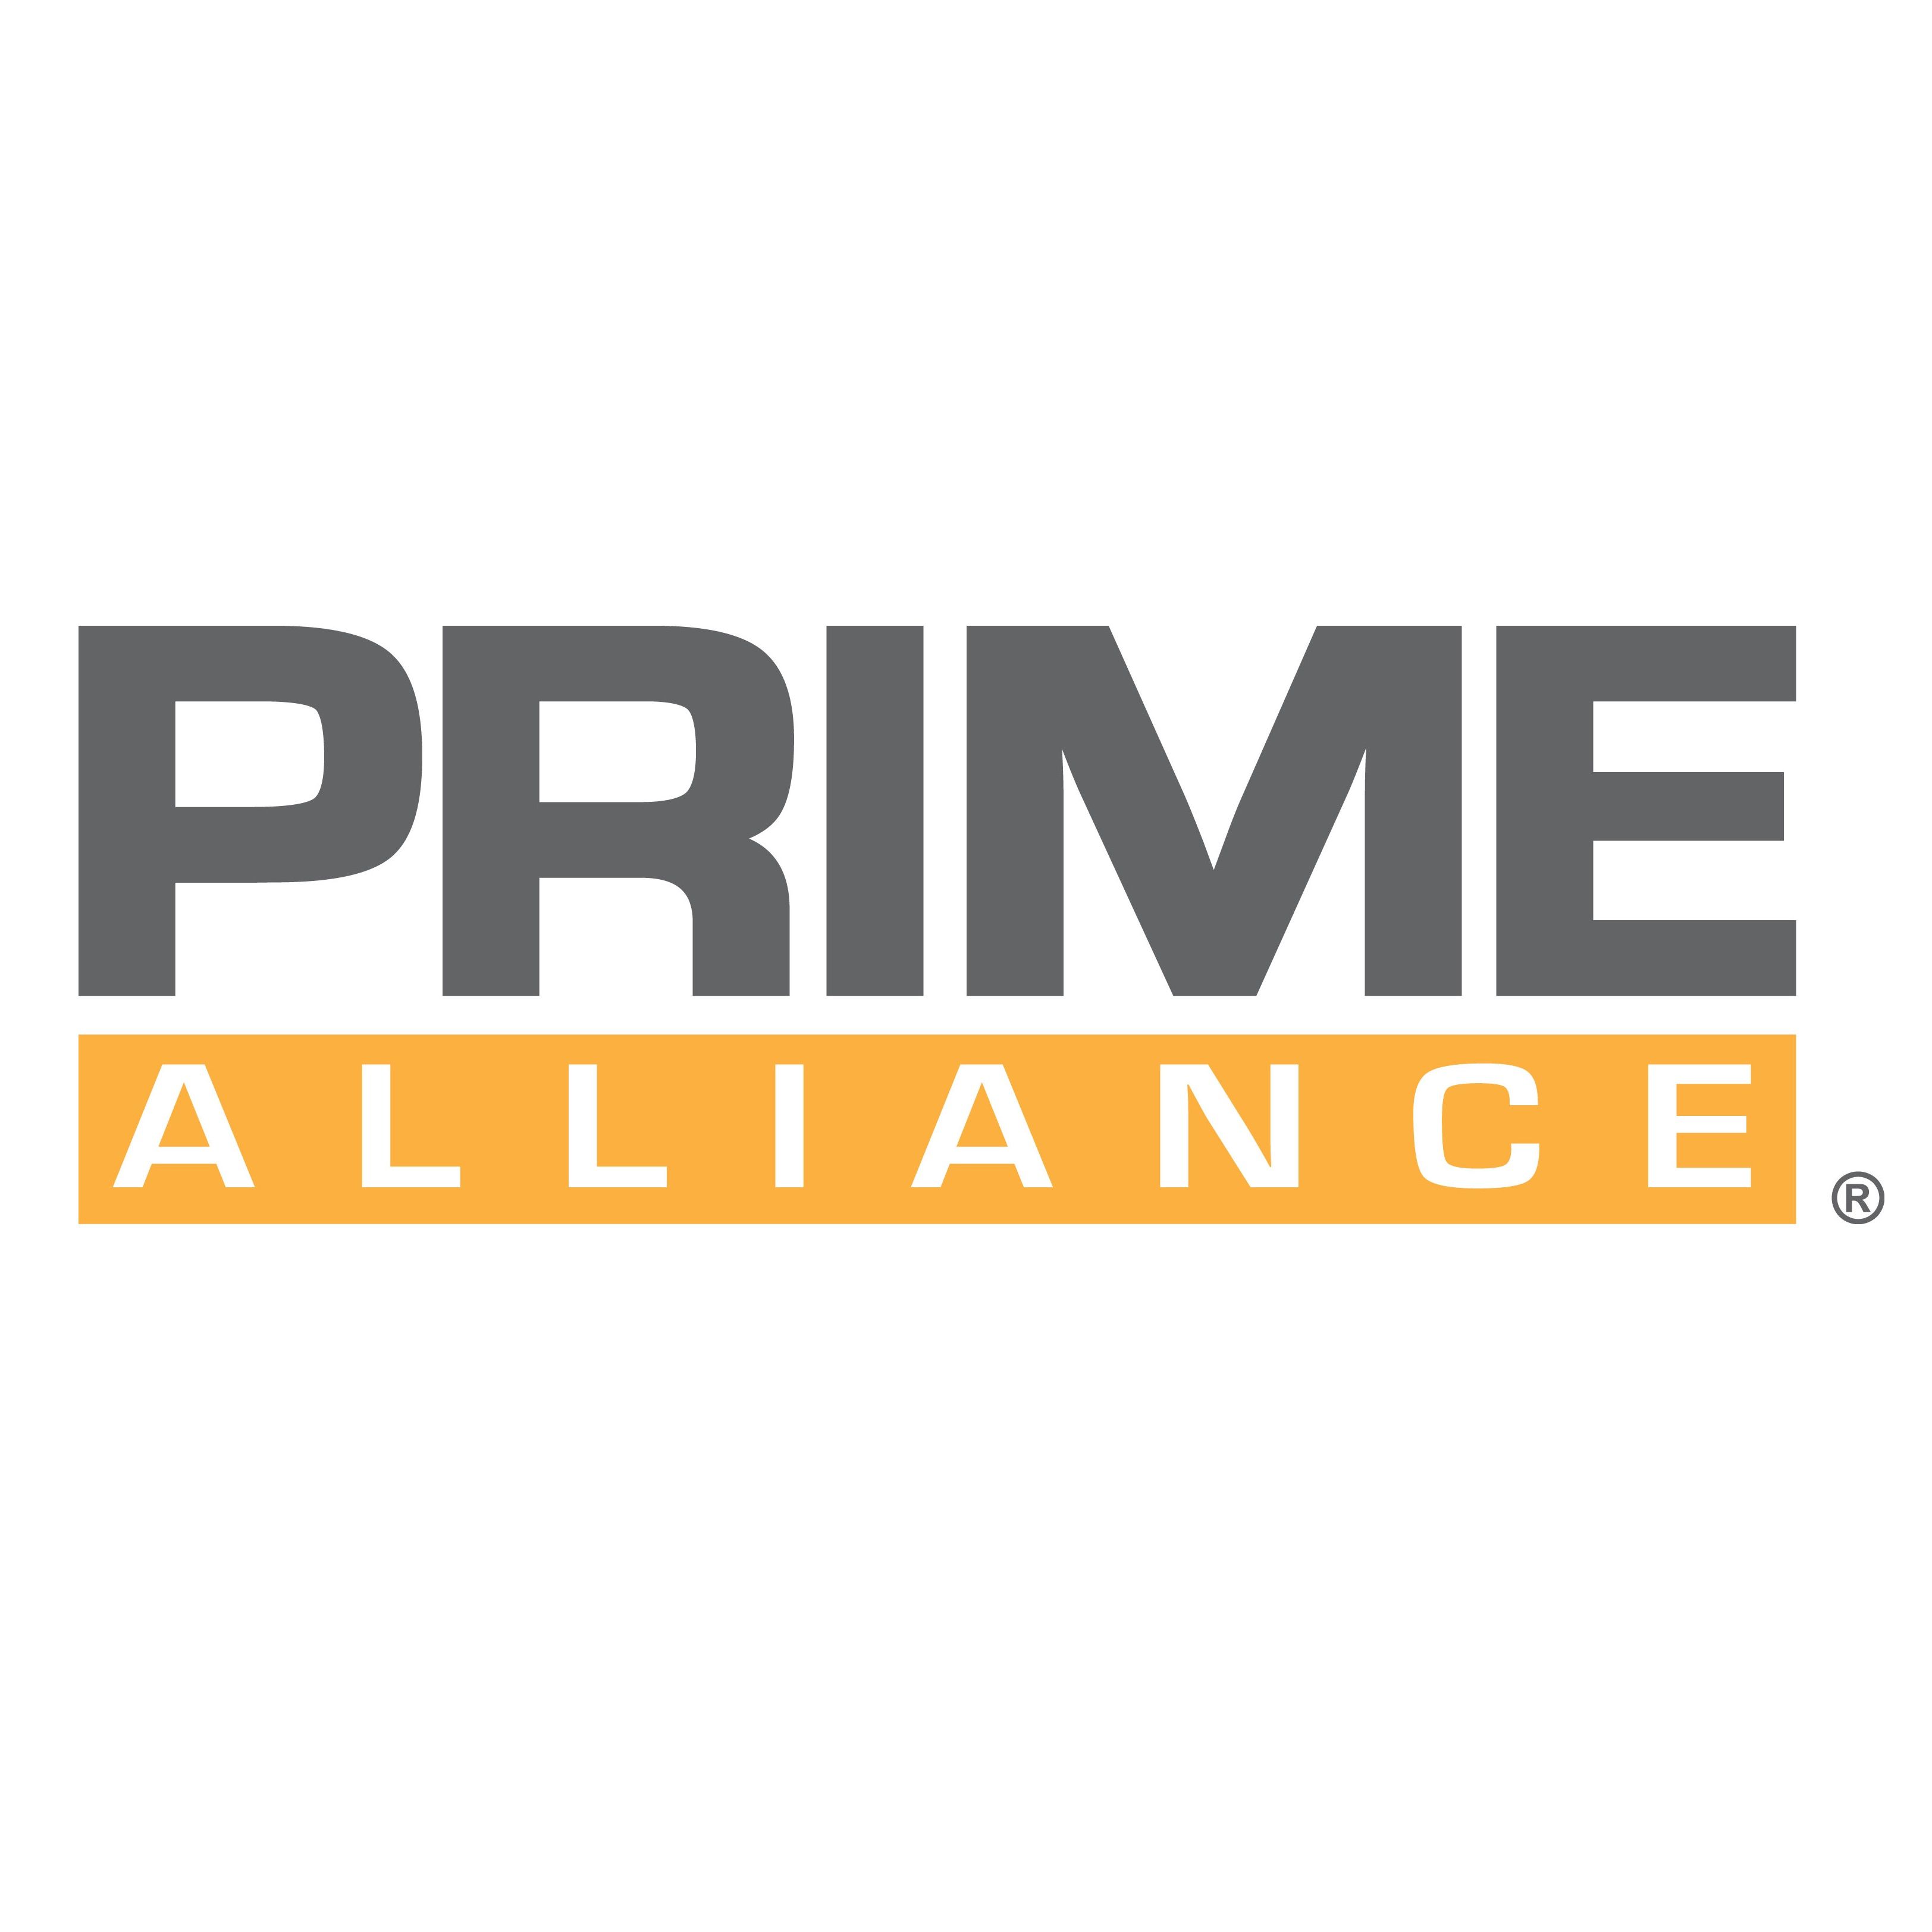 PRIME Alliance: BPL - A new paradigm shift for utilities